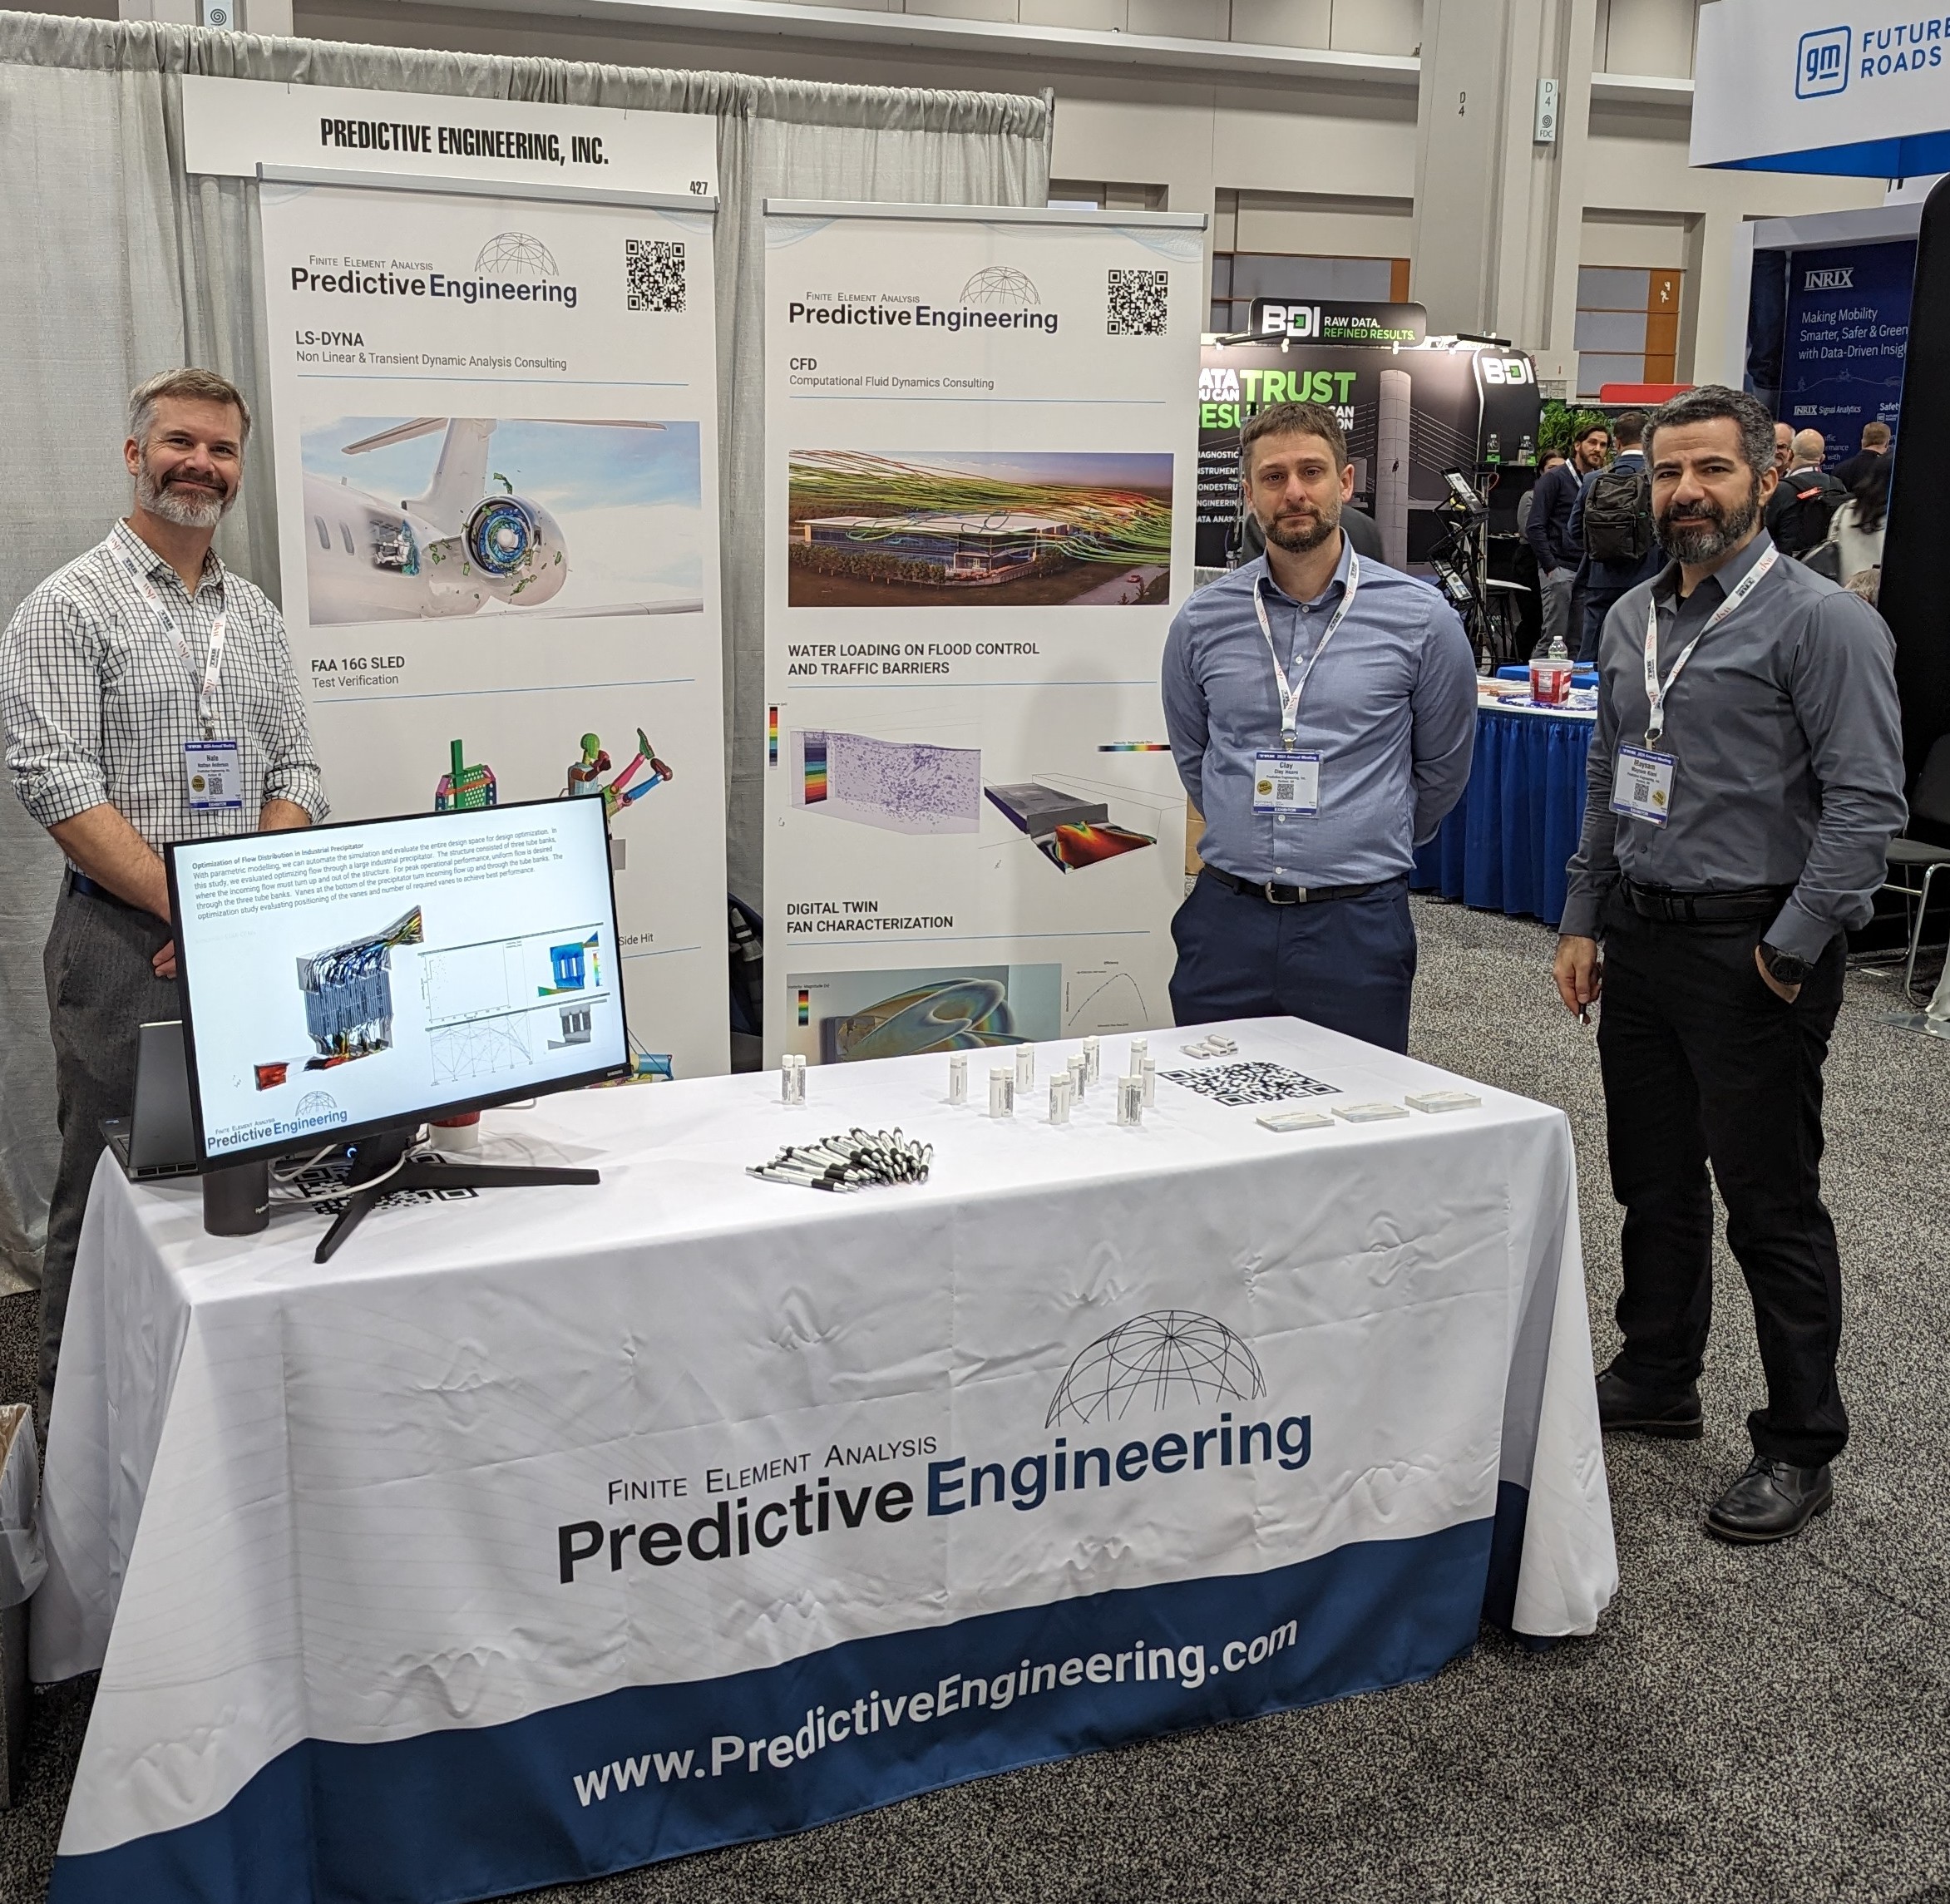 103th Transportation Research Board (TRB) Annual Meeting -  Predictive Engineering presence